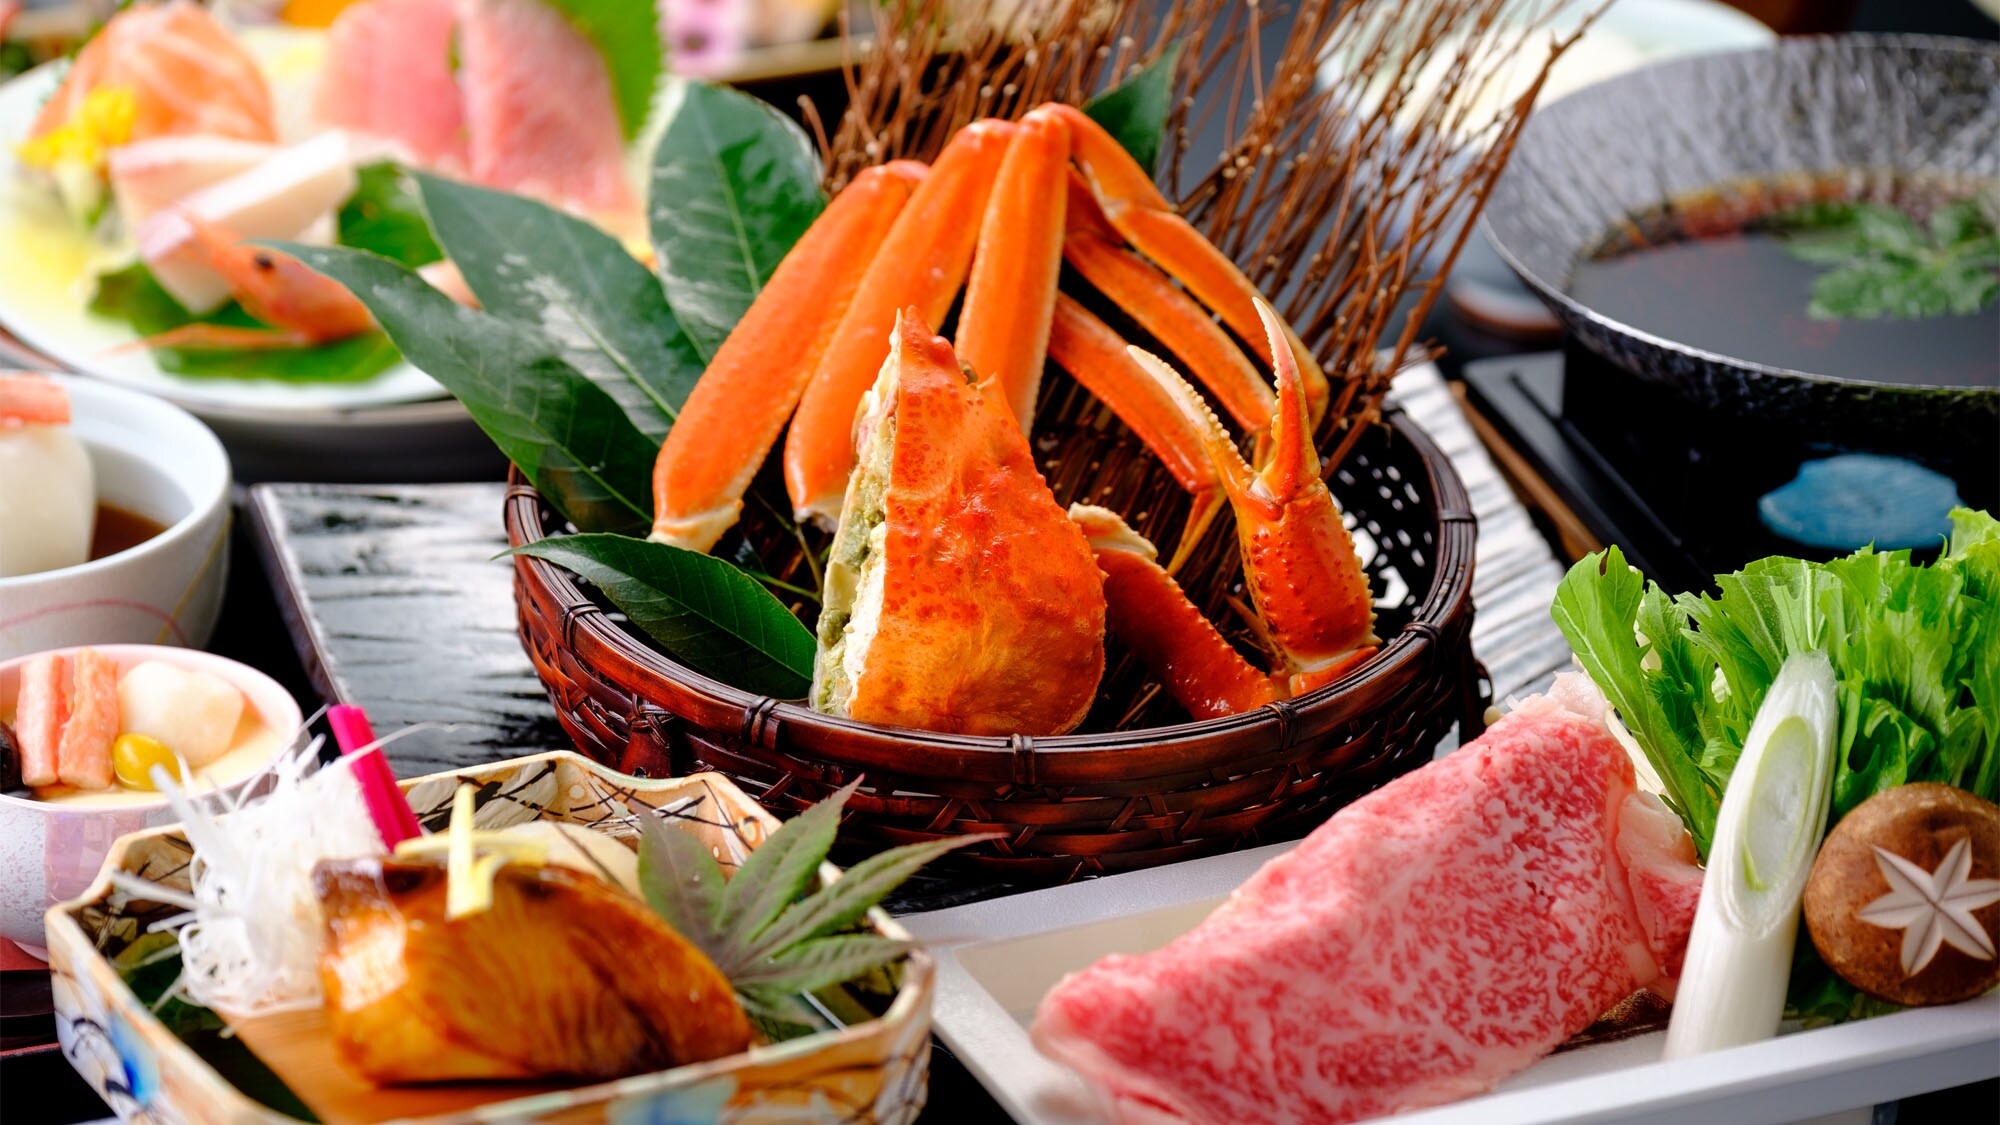 Winter [No crab only! ] A basic winter kaiseki meal where you can enjoy snow crab and Tottori Wagyu beef. 12 items